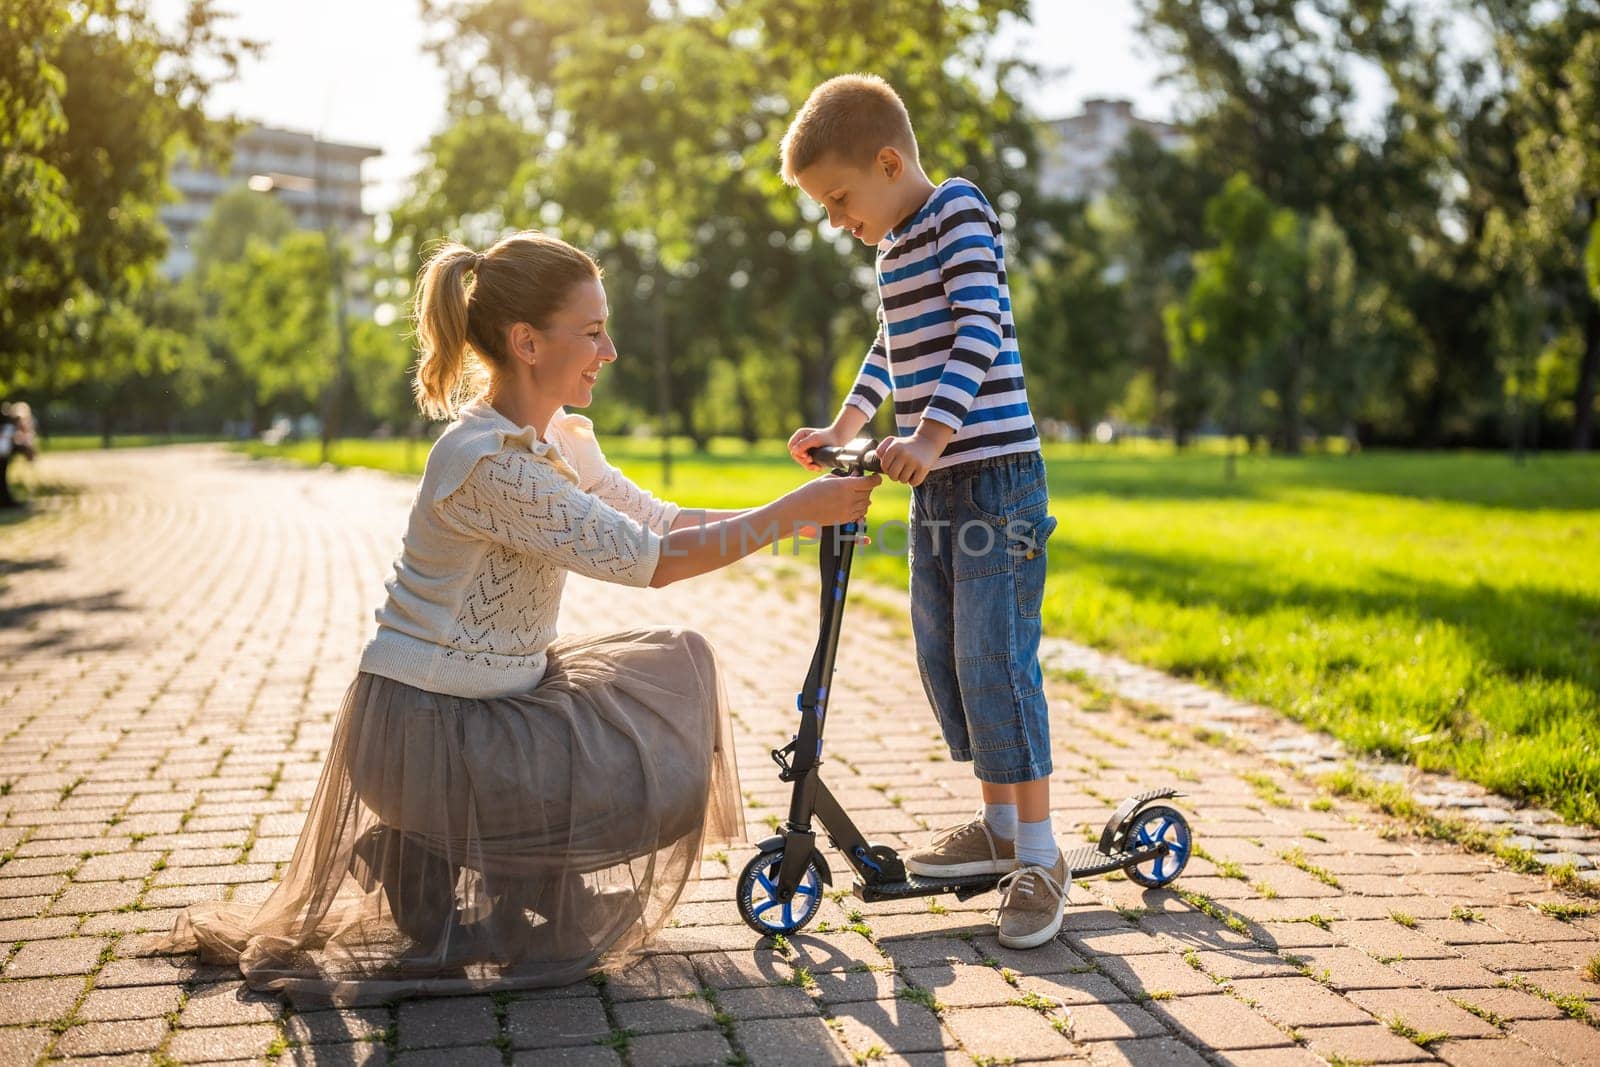 Mother having fun with her son in park on sunny day. Boy is ridding scooter.